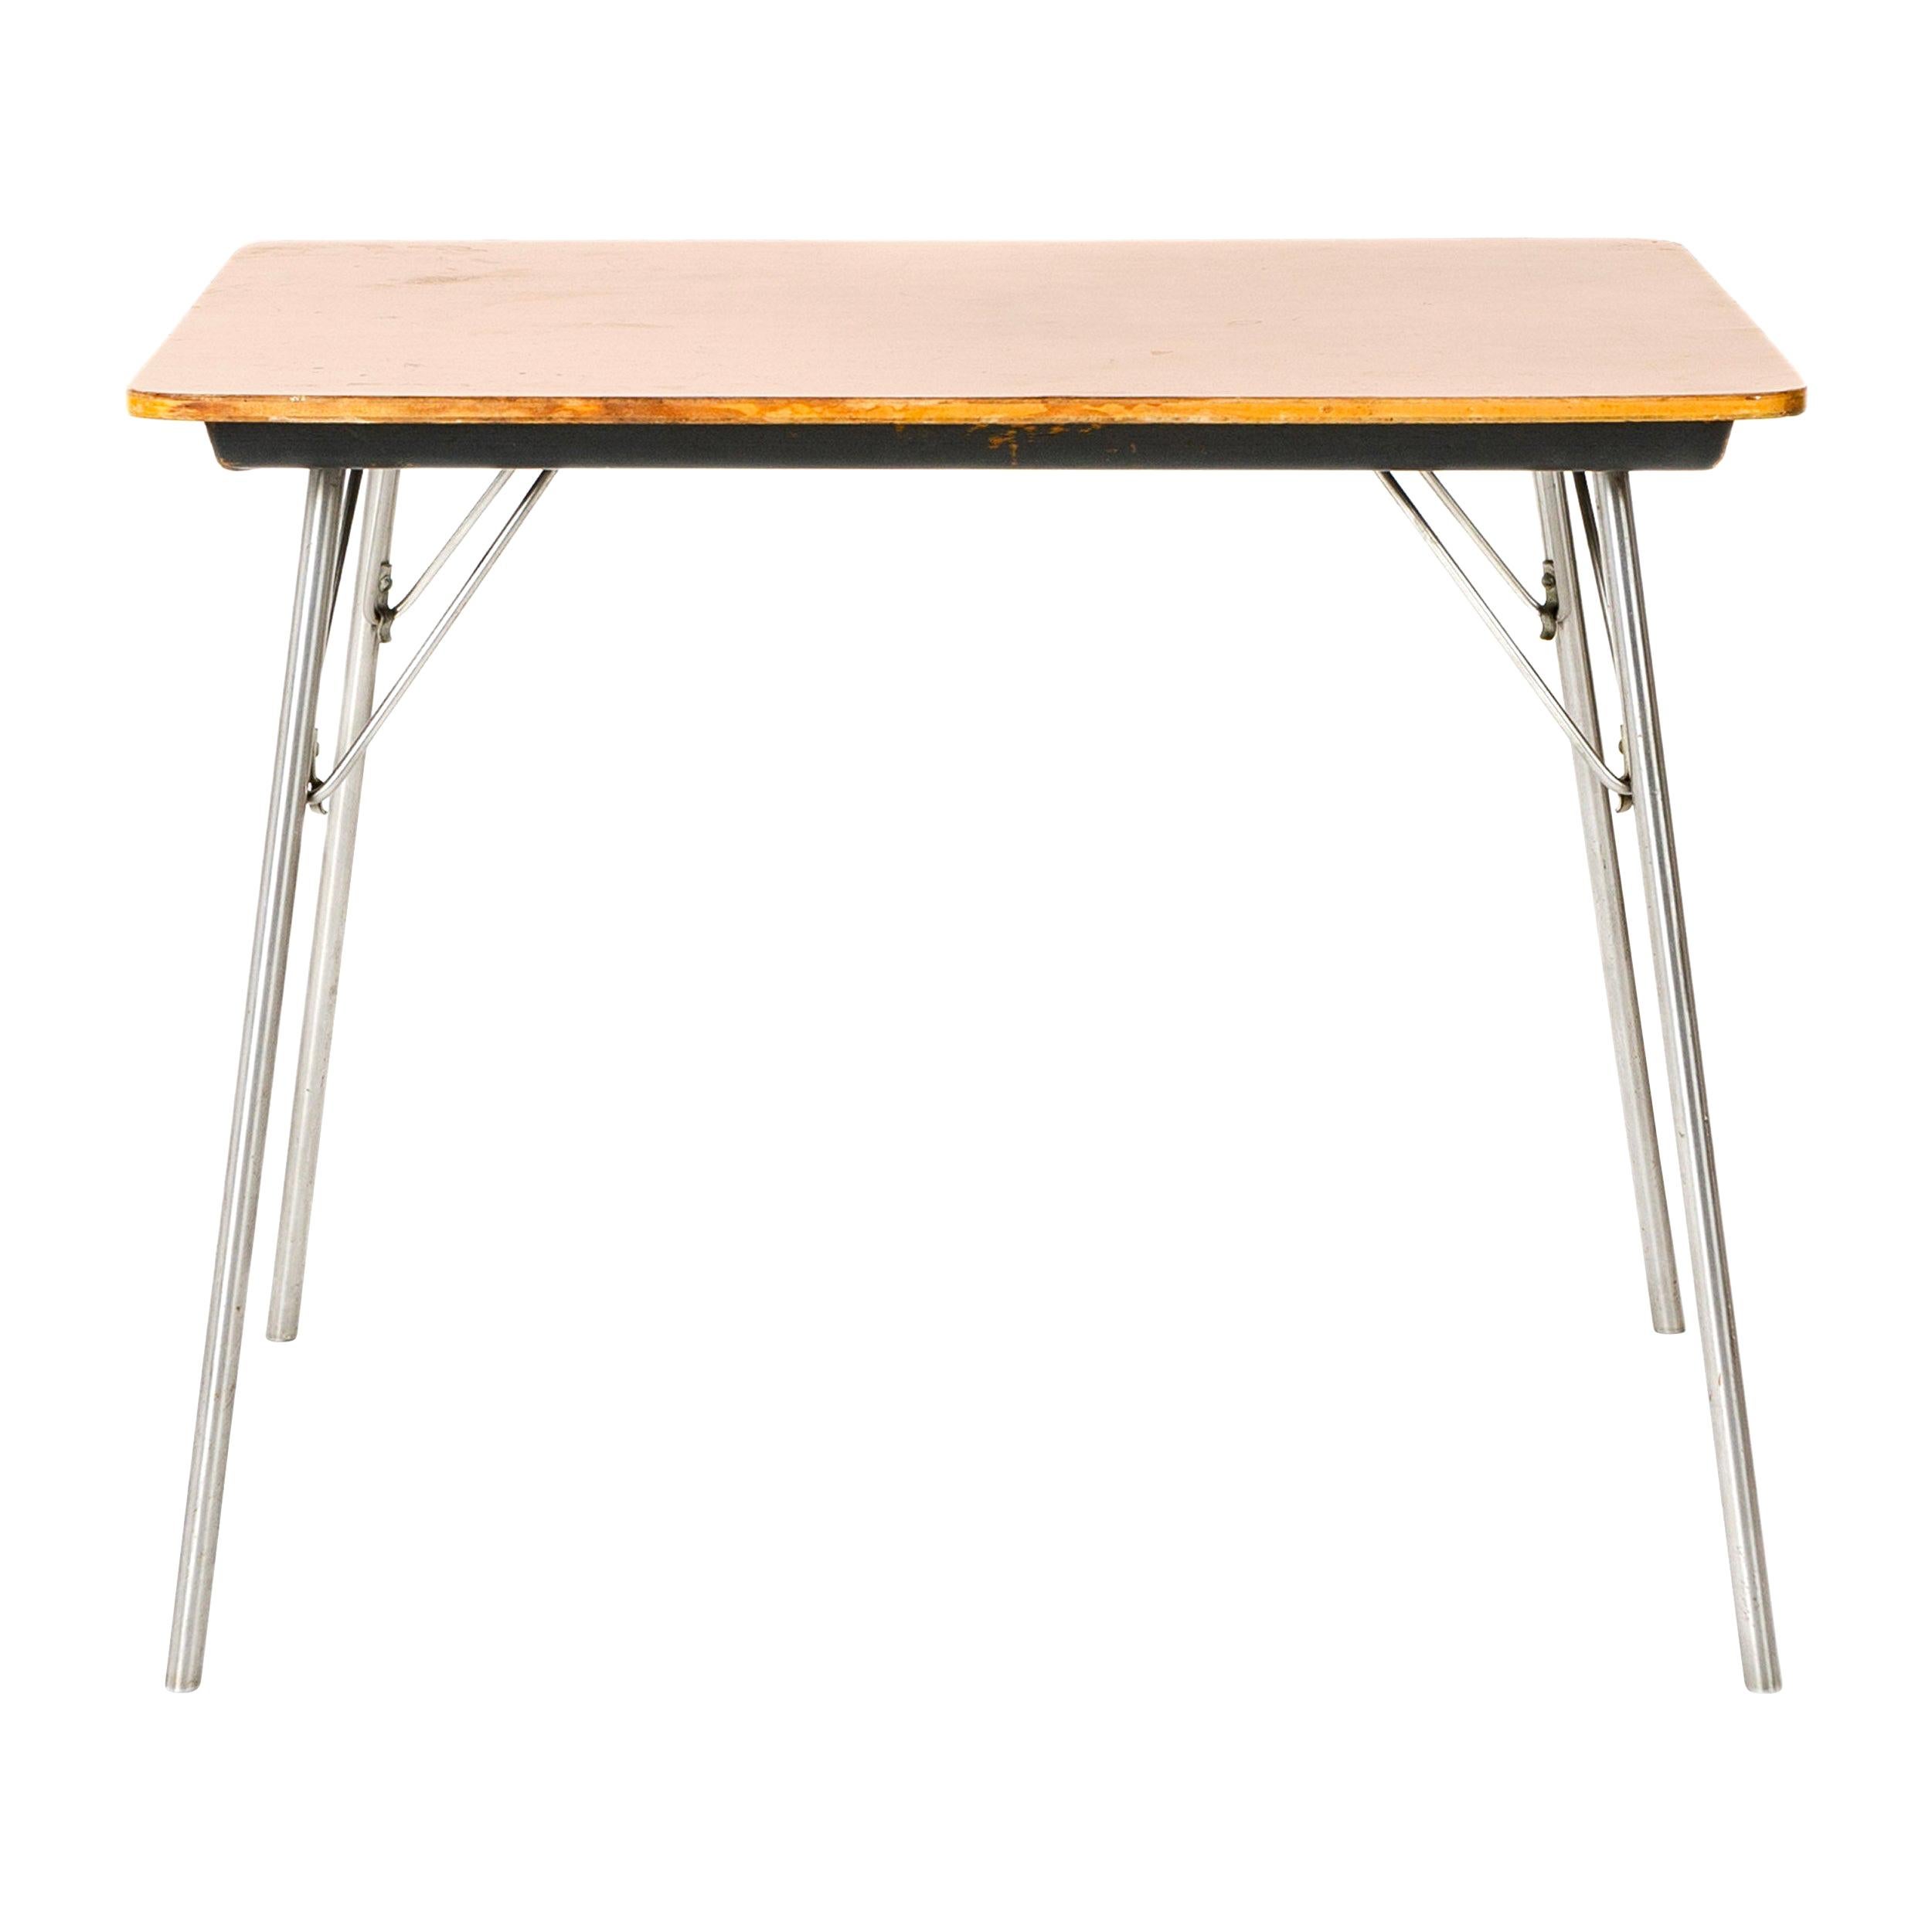 1950s IT Folding Table by Charles and Ray Eames for Herman Miller